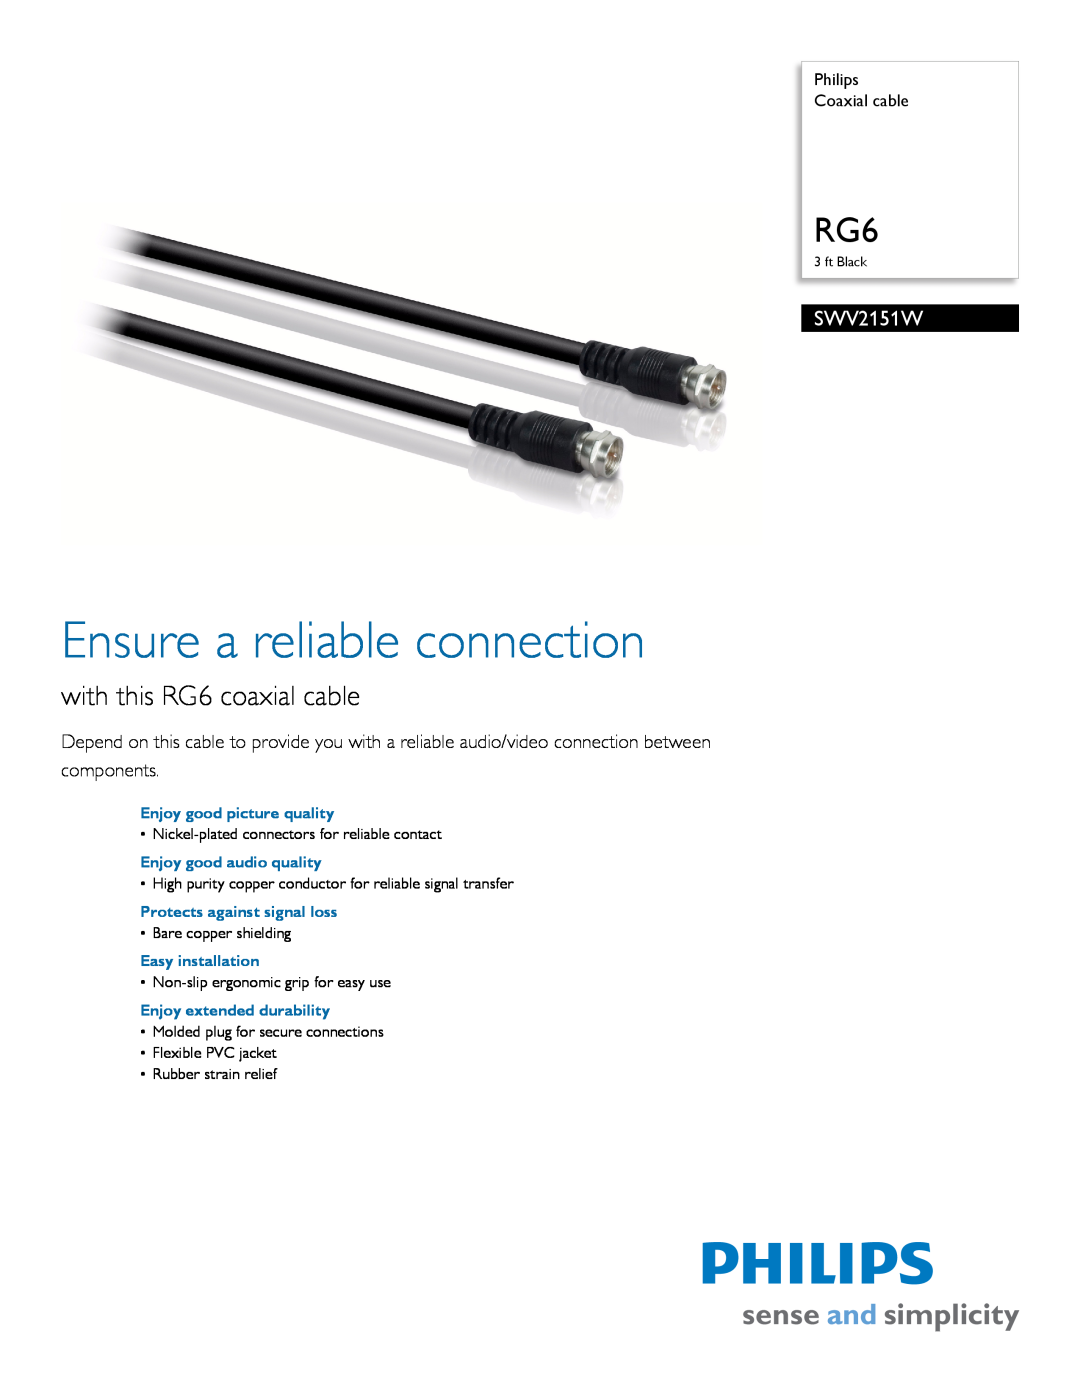 Philips SWV2151W manual Philips Coaxial cable, Ensure a reliable connection, with this RG6 coaxial cable 